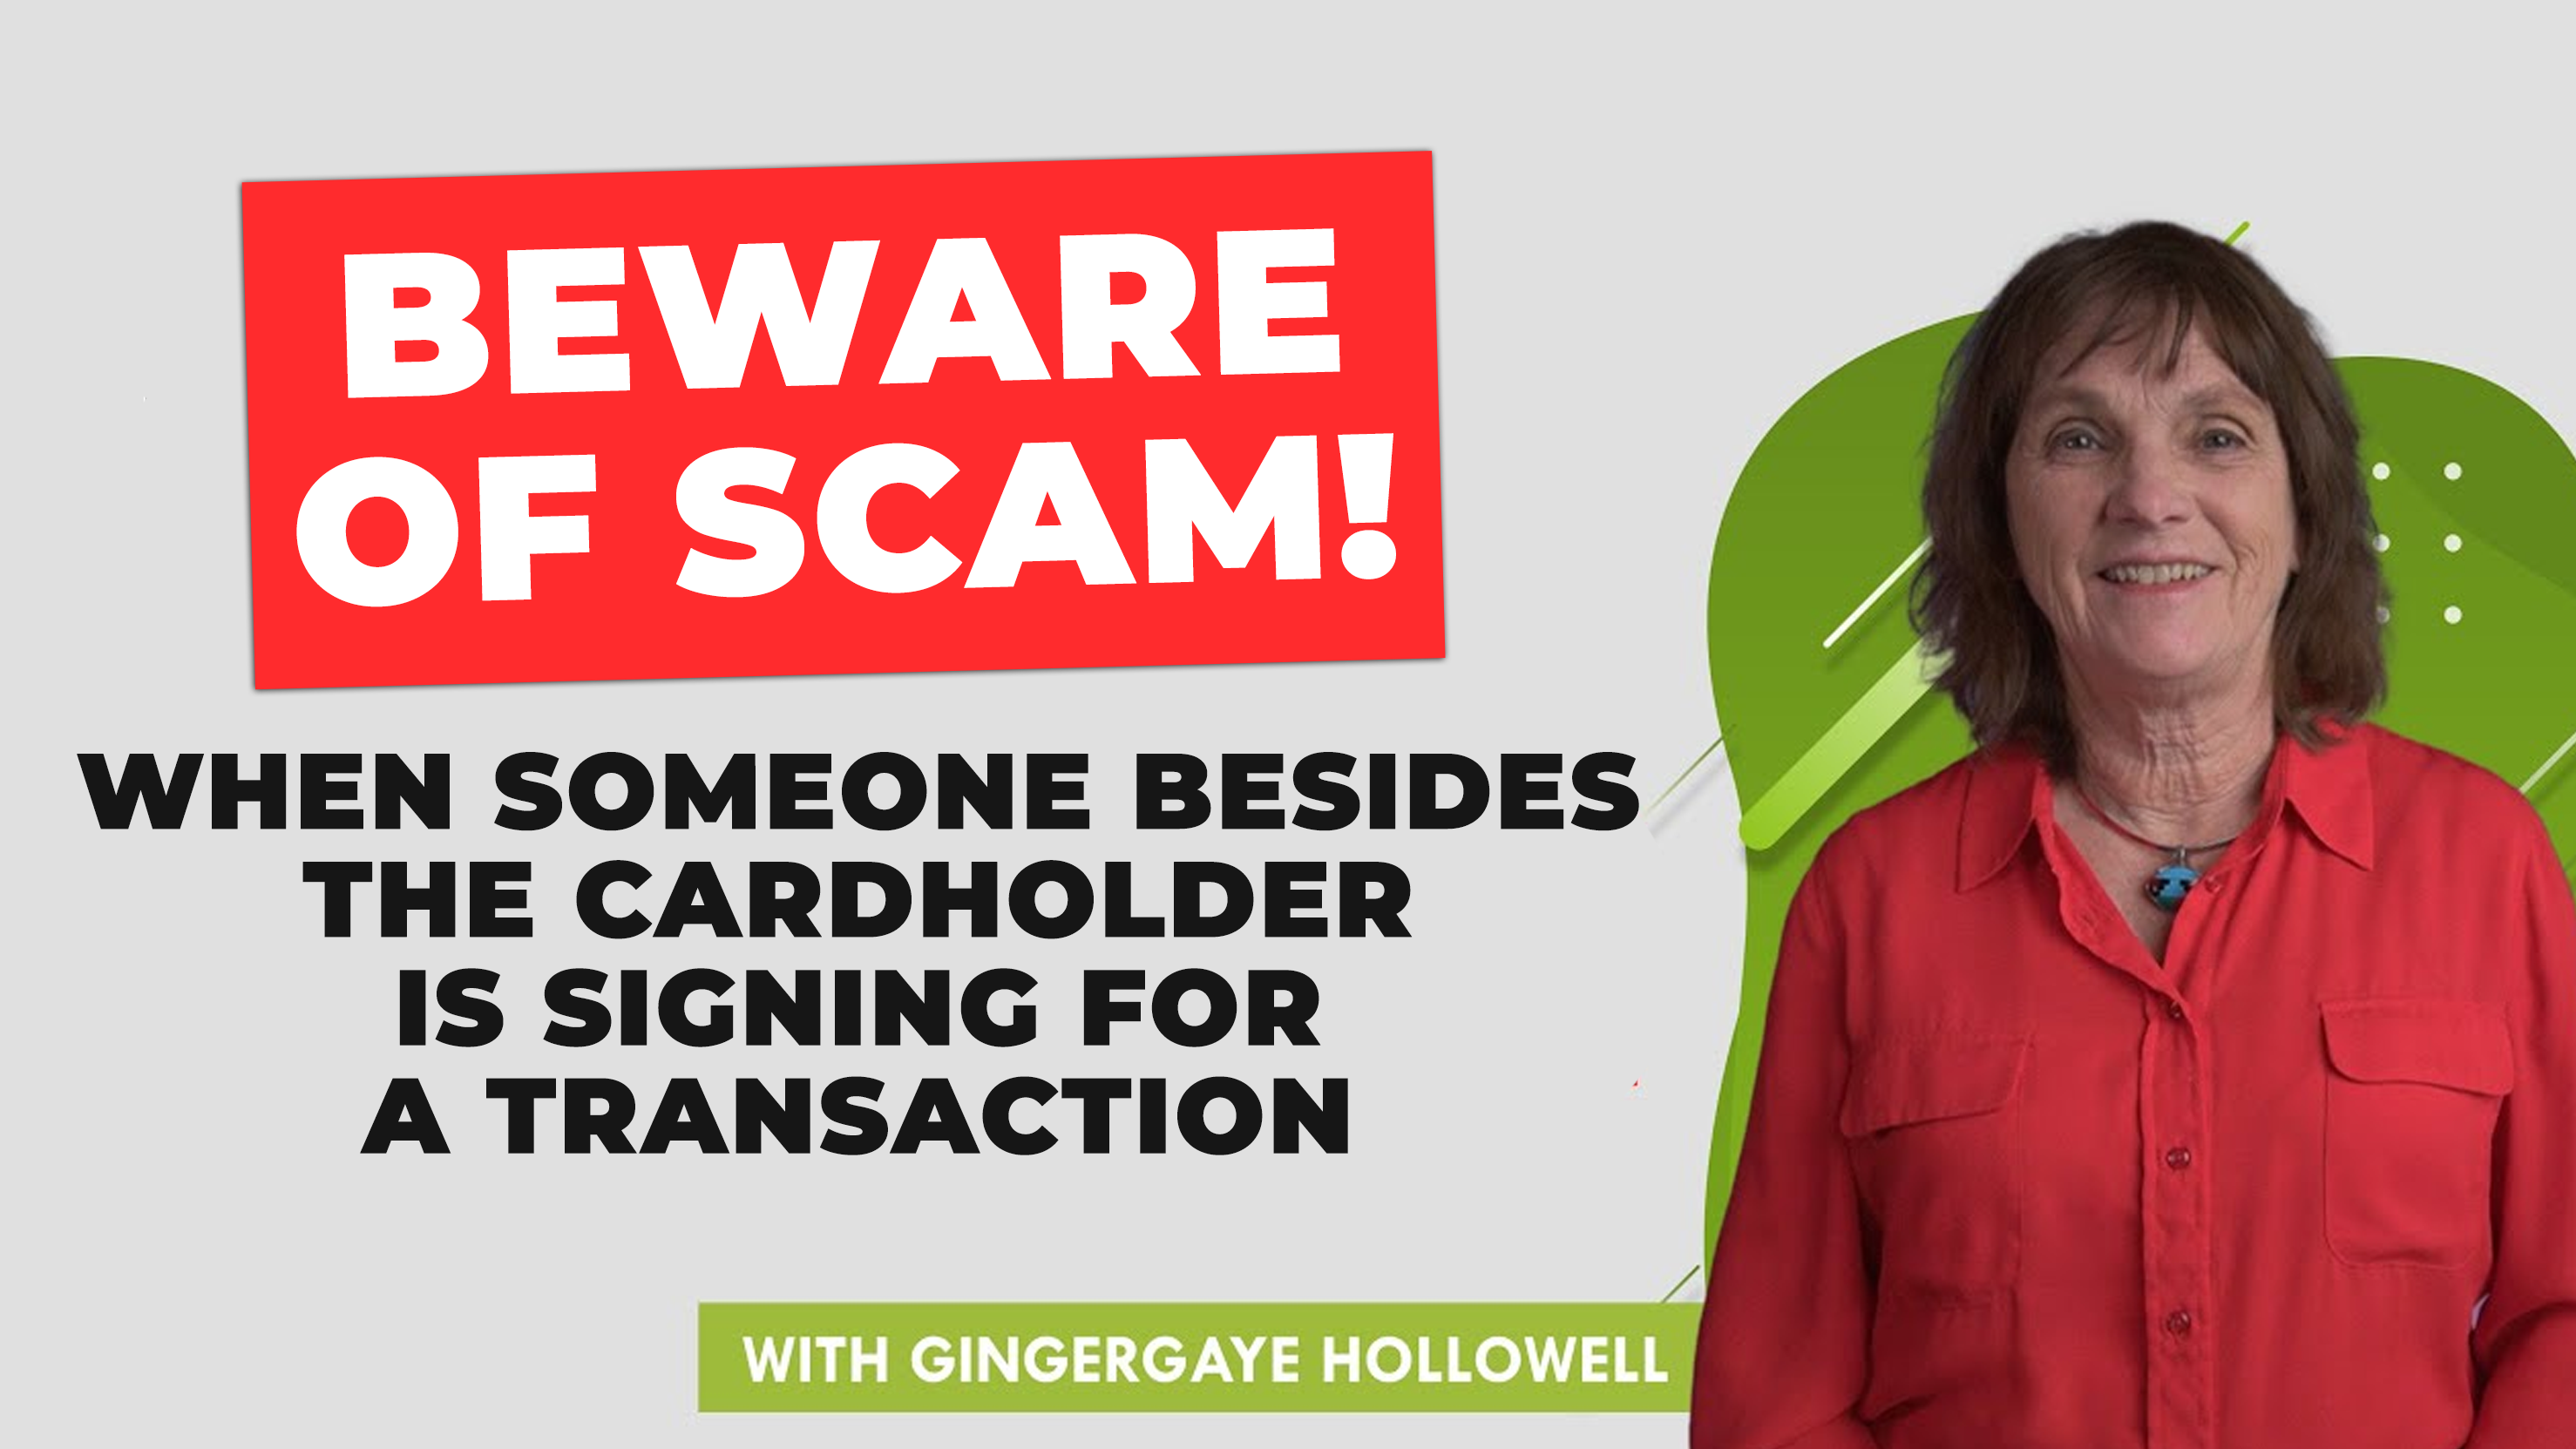 Beware of Scam When Someone Besides the Cardholder is Signing for a Transaction